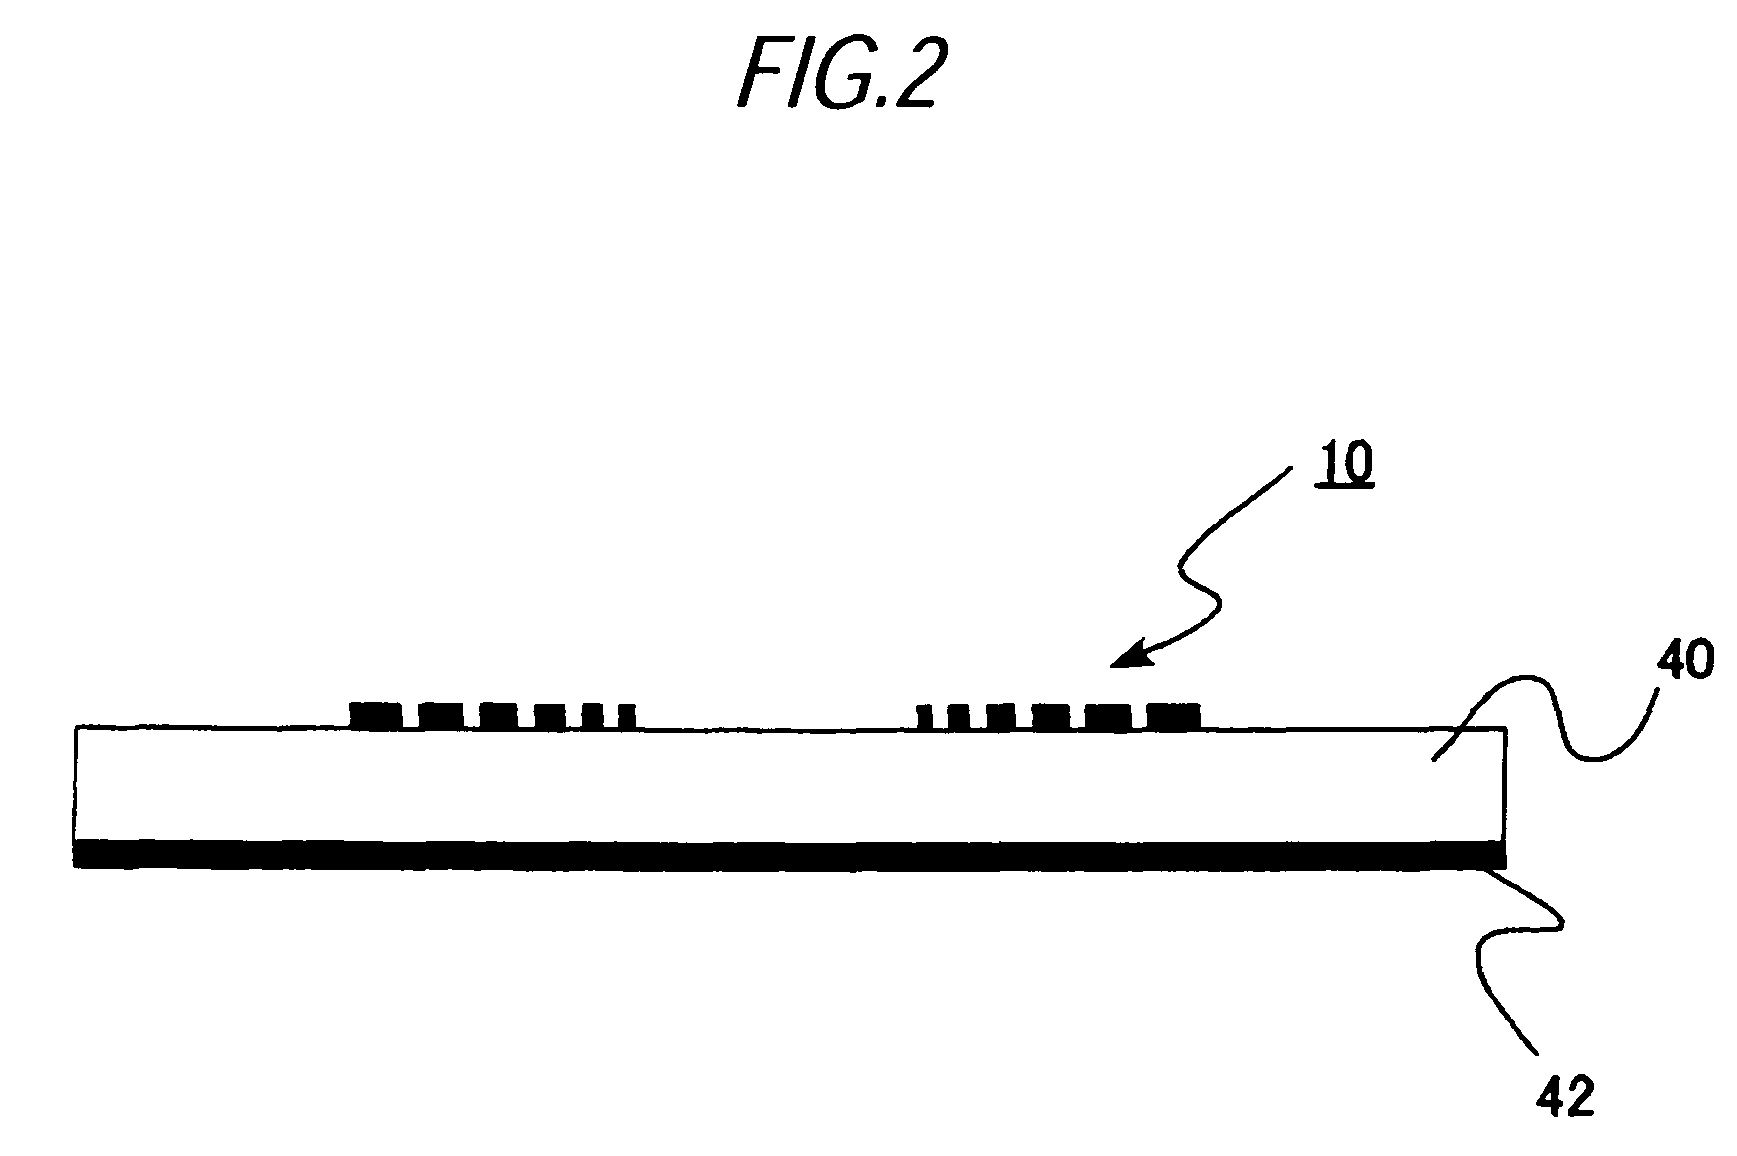 Resonator comprised of a bent conductor line with slits therein and a filter formed therefrom